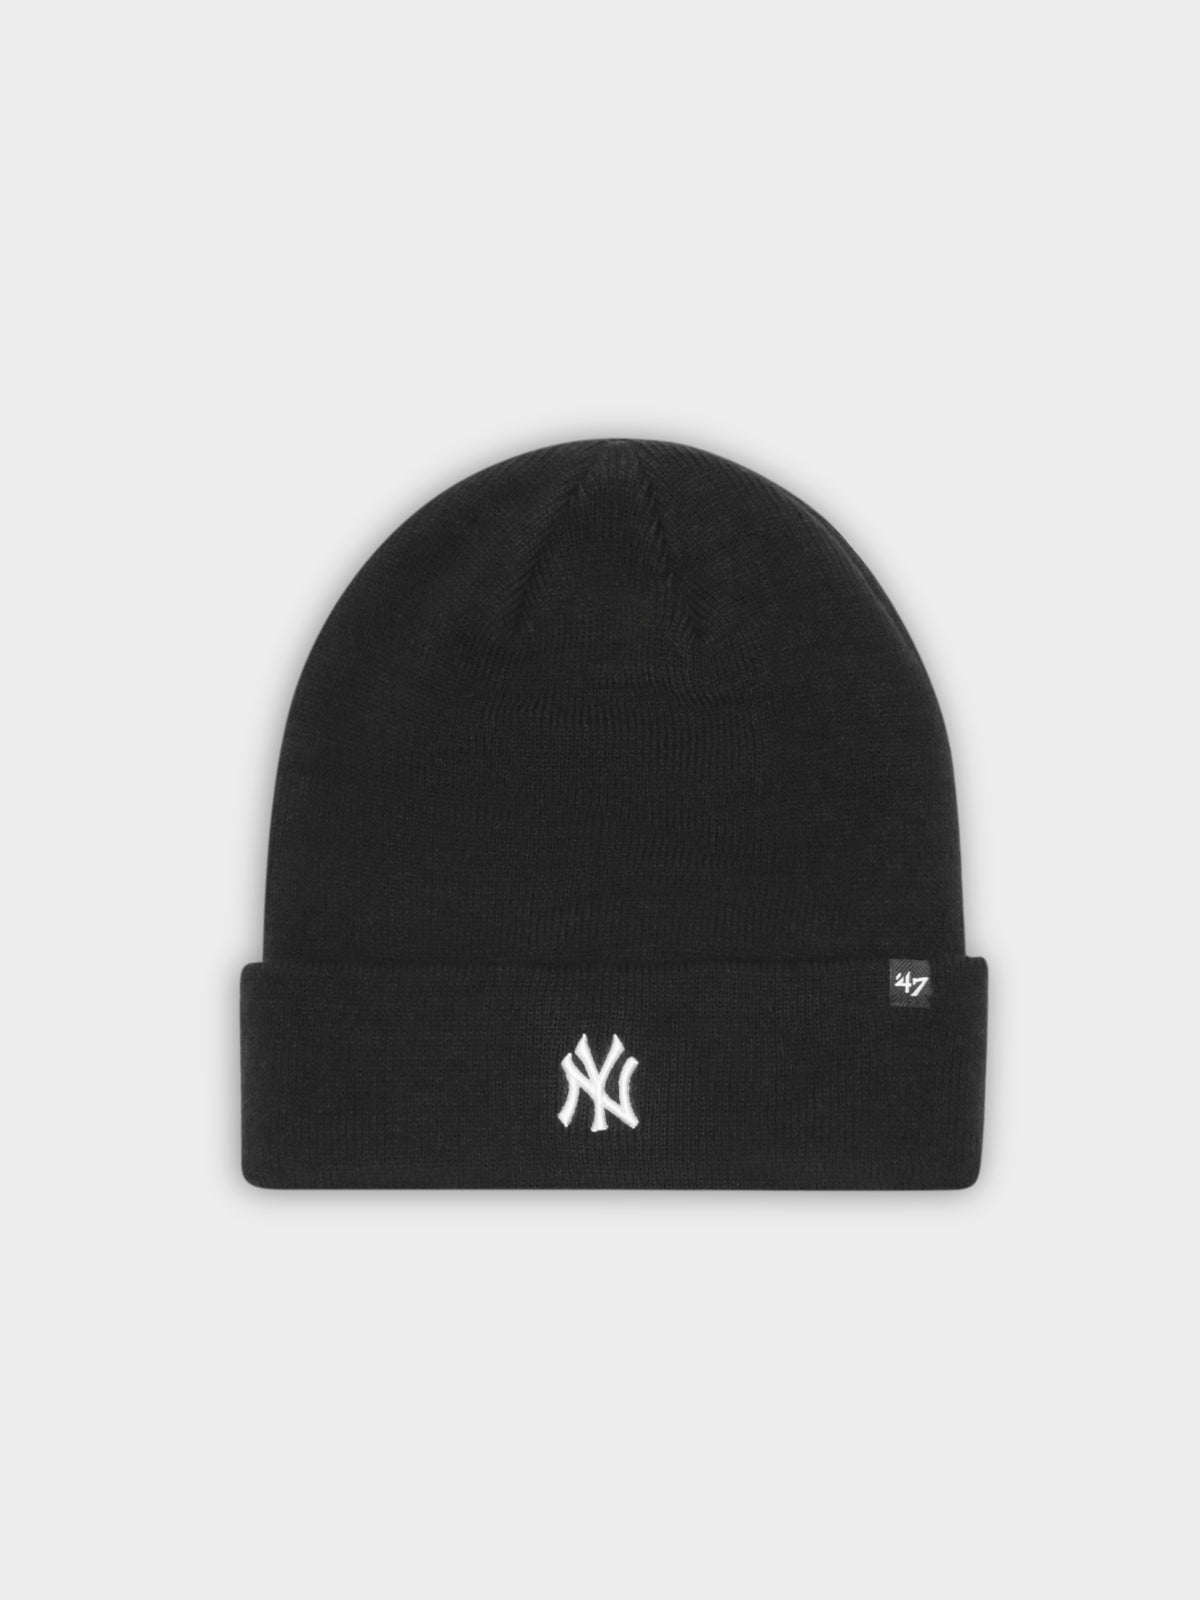 NY Yankees Centerfield Knit Beanie in Black